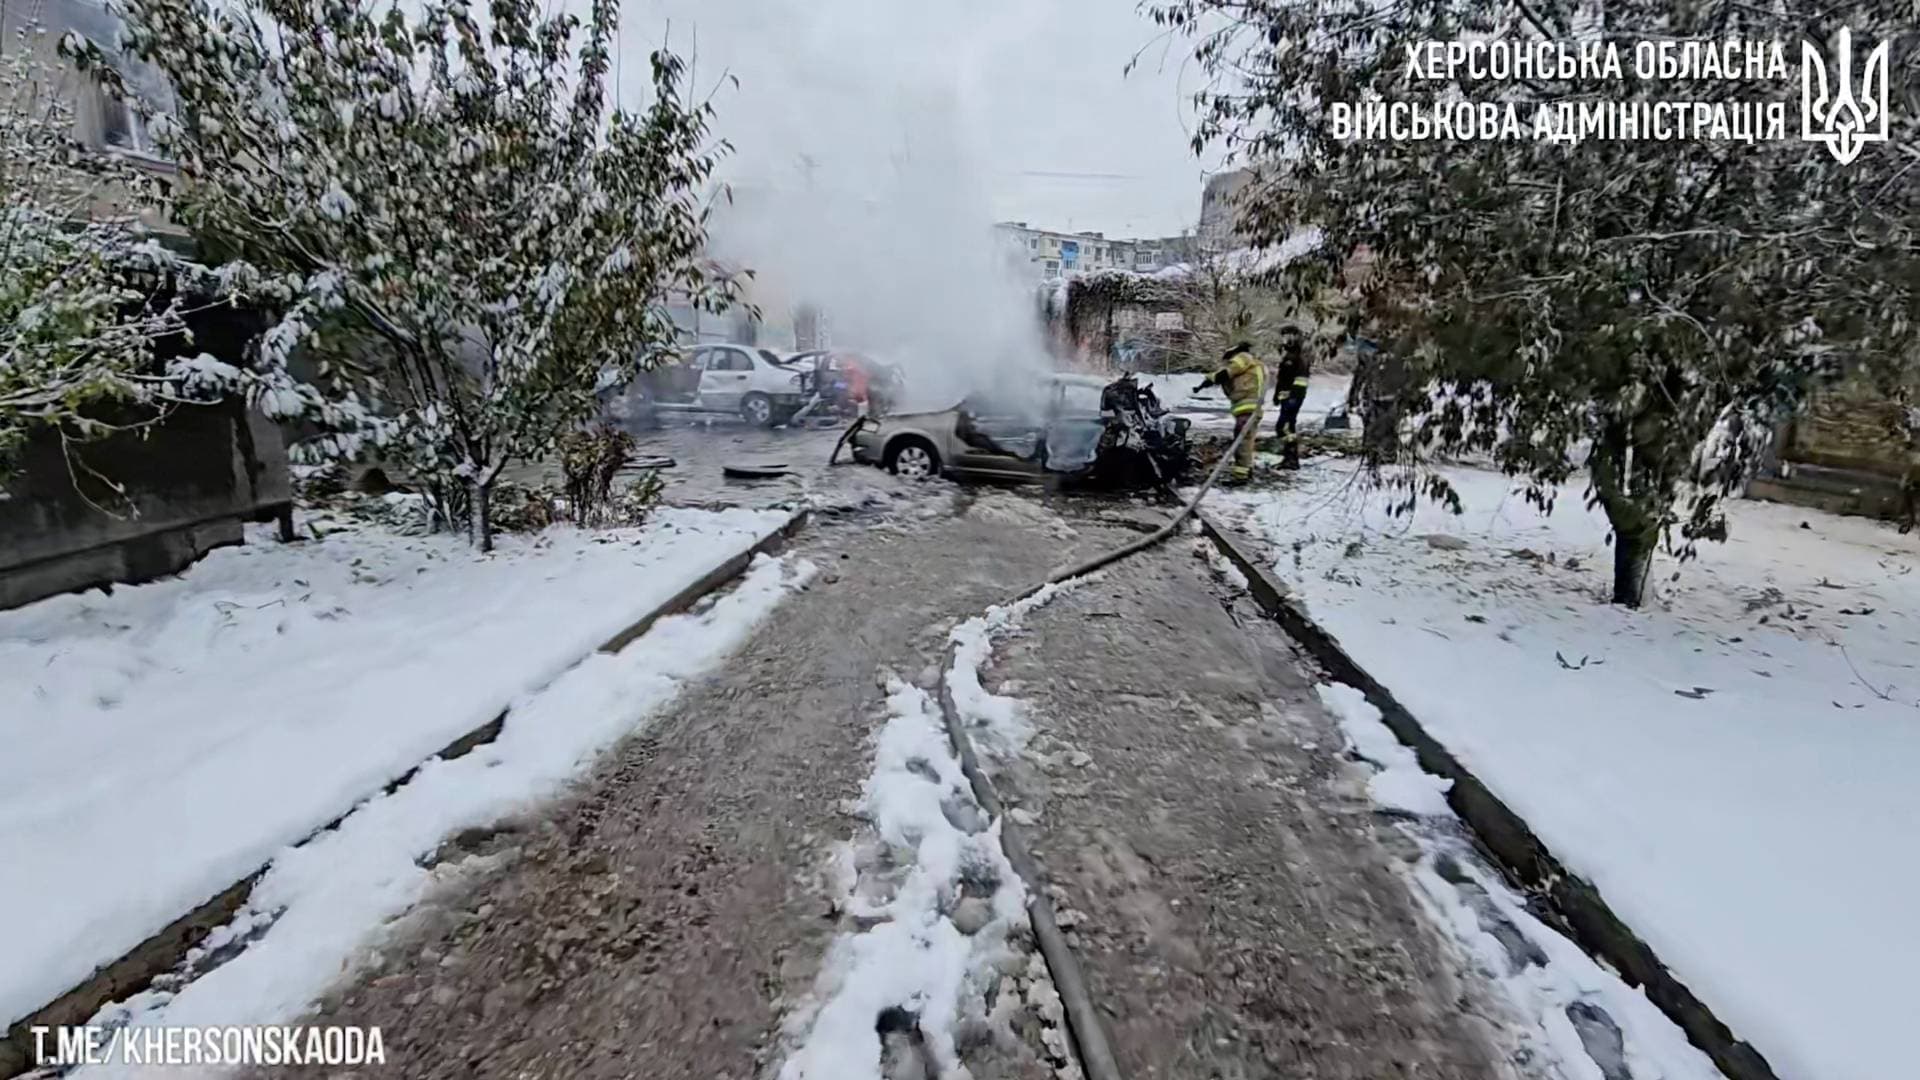 First responders work near burnt-out cars after a reported deadly Russian artillery strike in Kherson